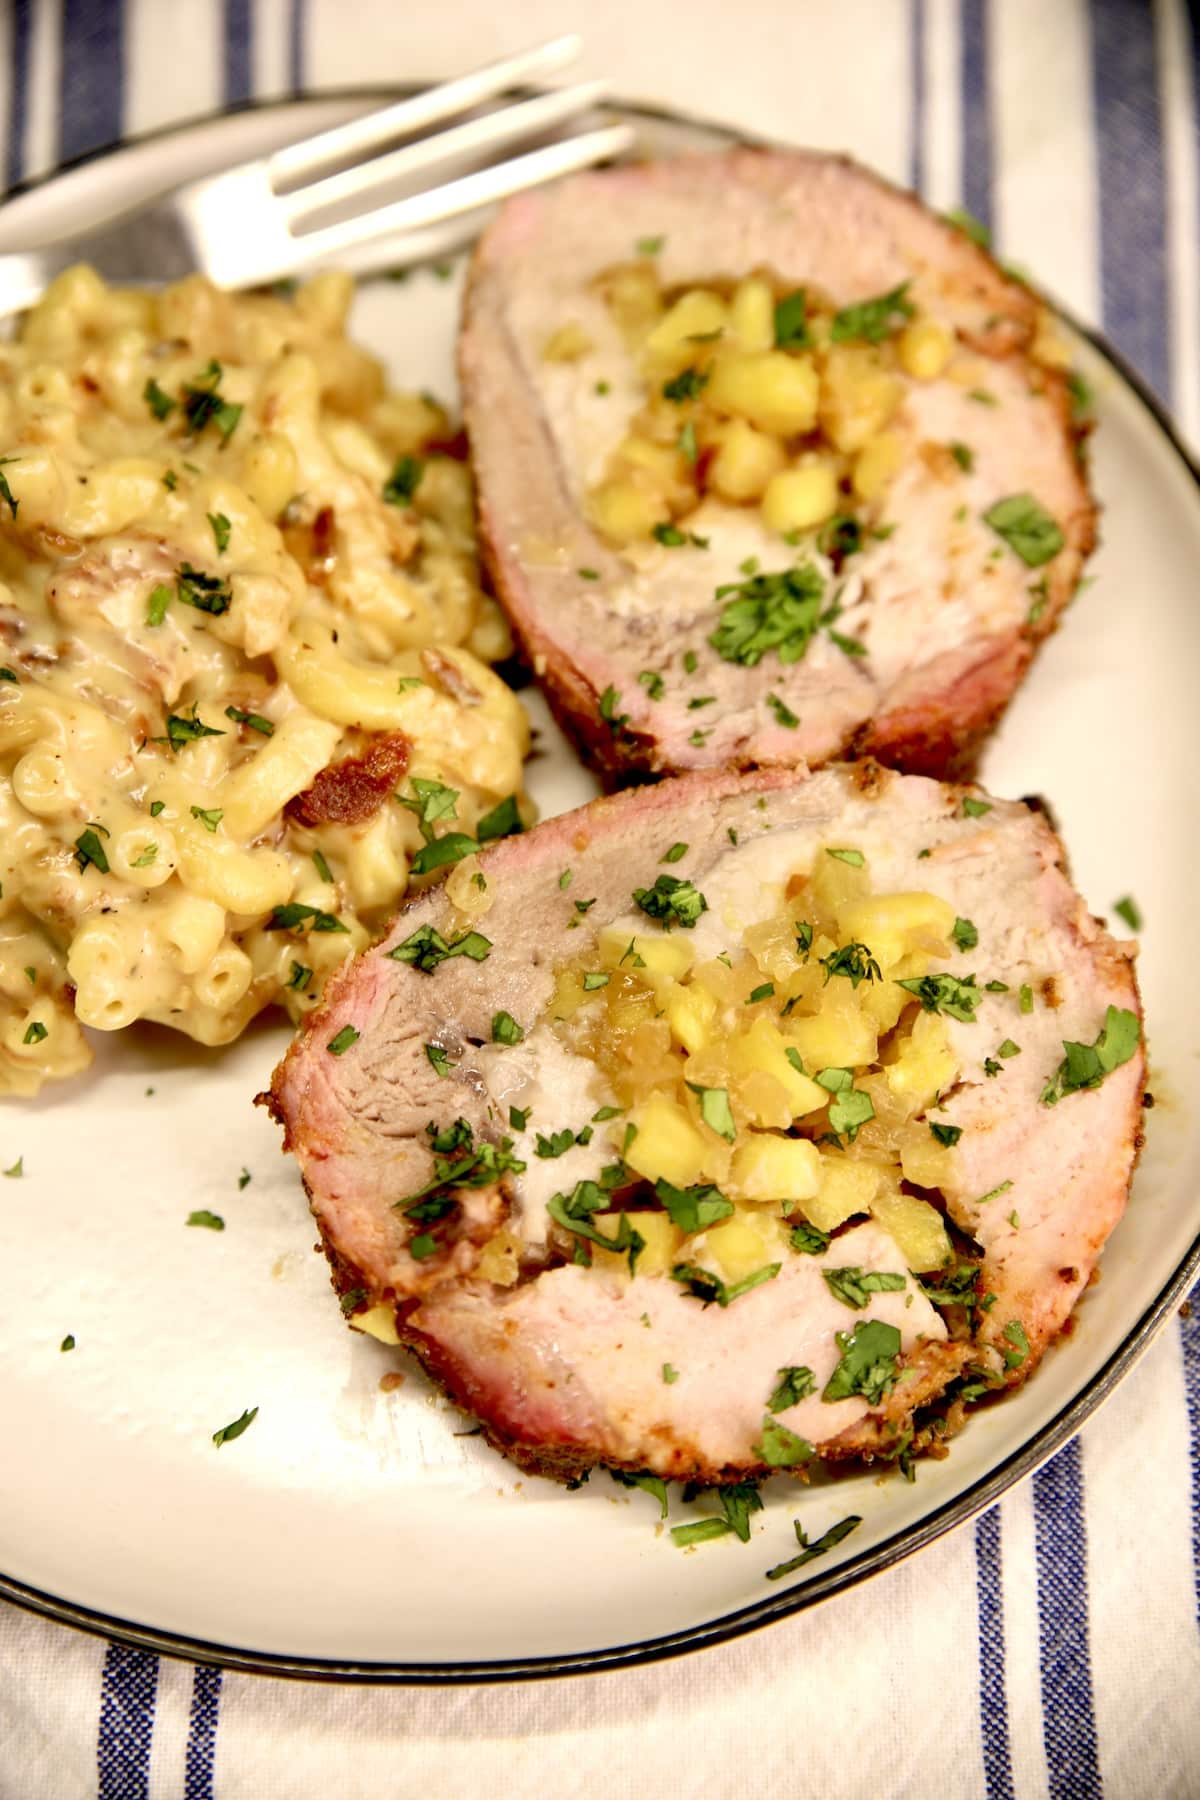 Plated 2 slices of pork loin stuffed with pineapple, mac and cheese.